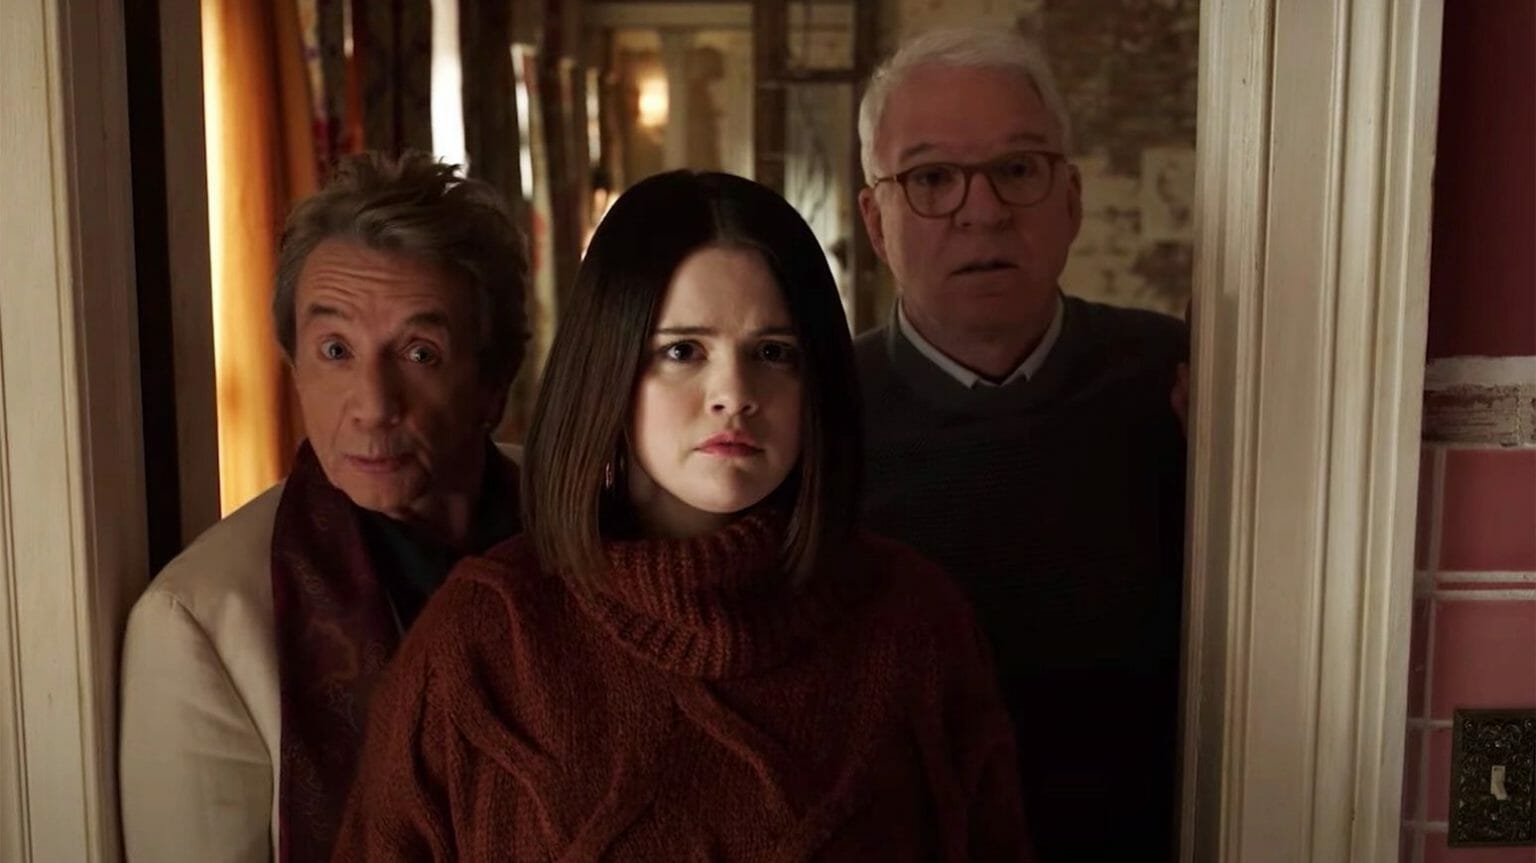 Martin Short, Selena Gomez, and Steve Martin stand together in total shock after opening a door in ONLY MURDERS IN THE BUILDING Season 2.